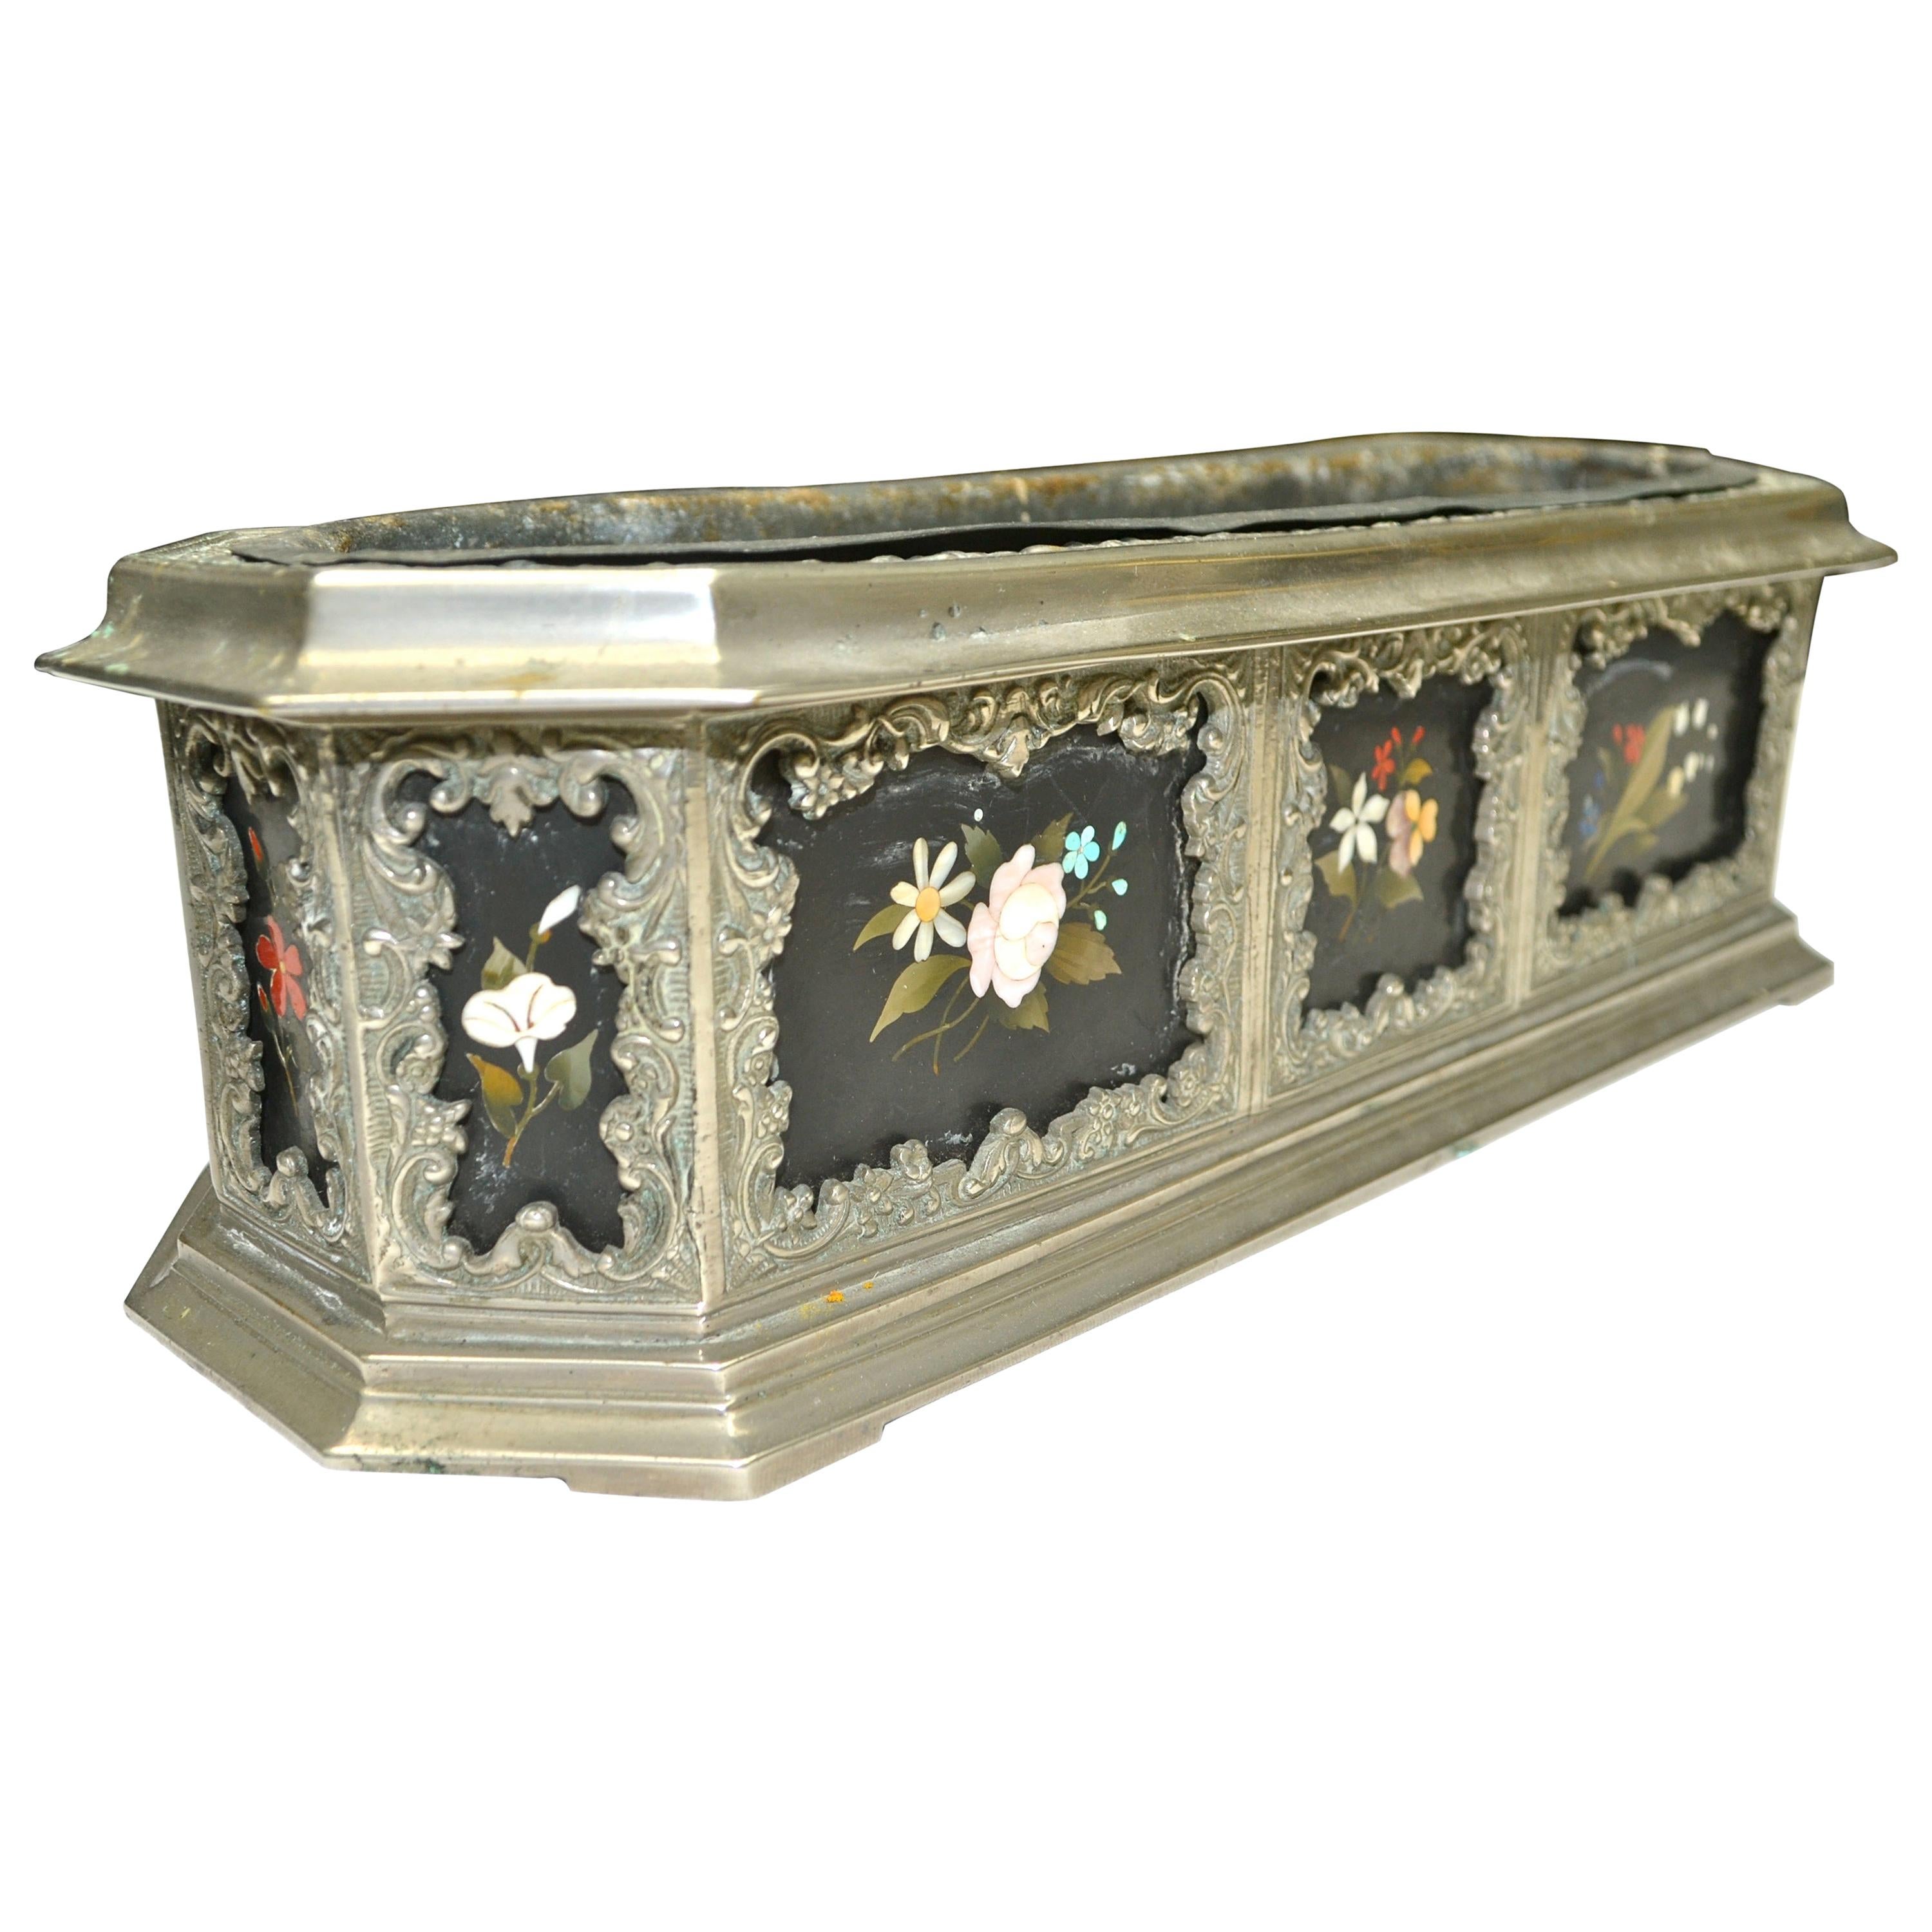 Silvered Metal and Pietra Dura Table Planter